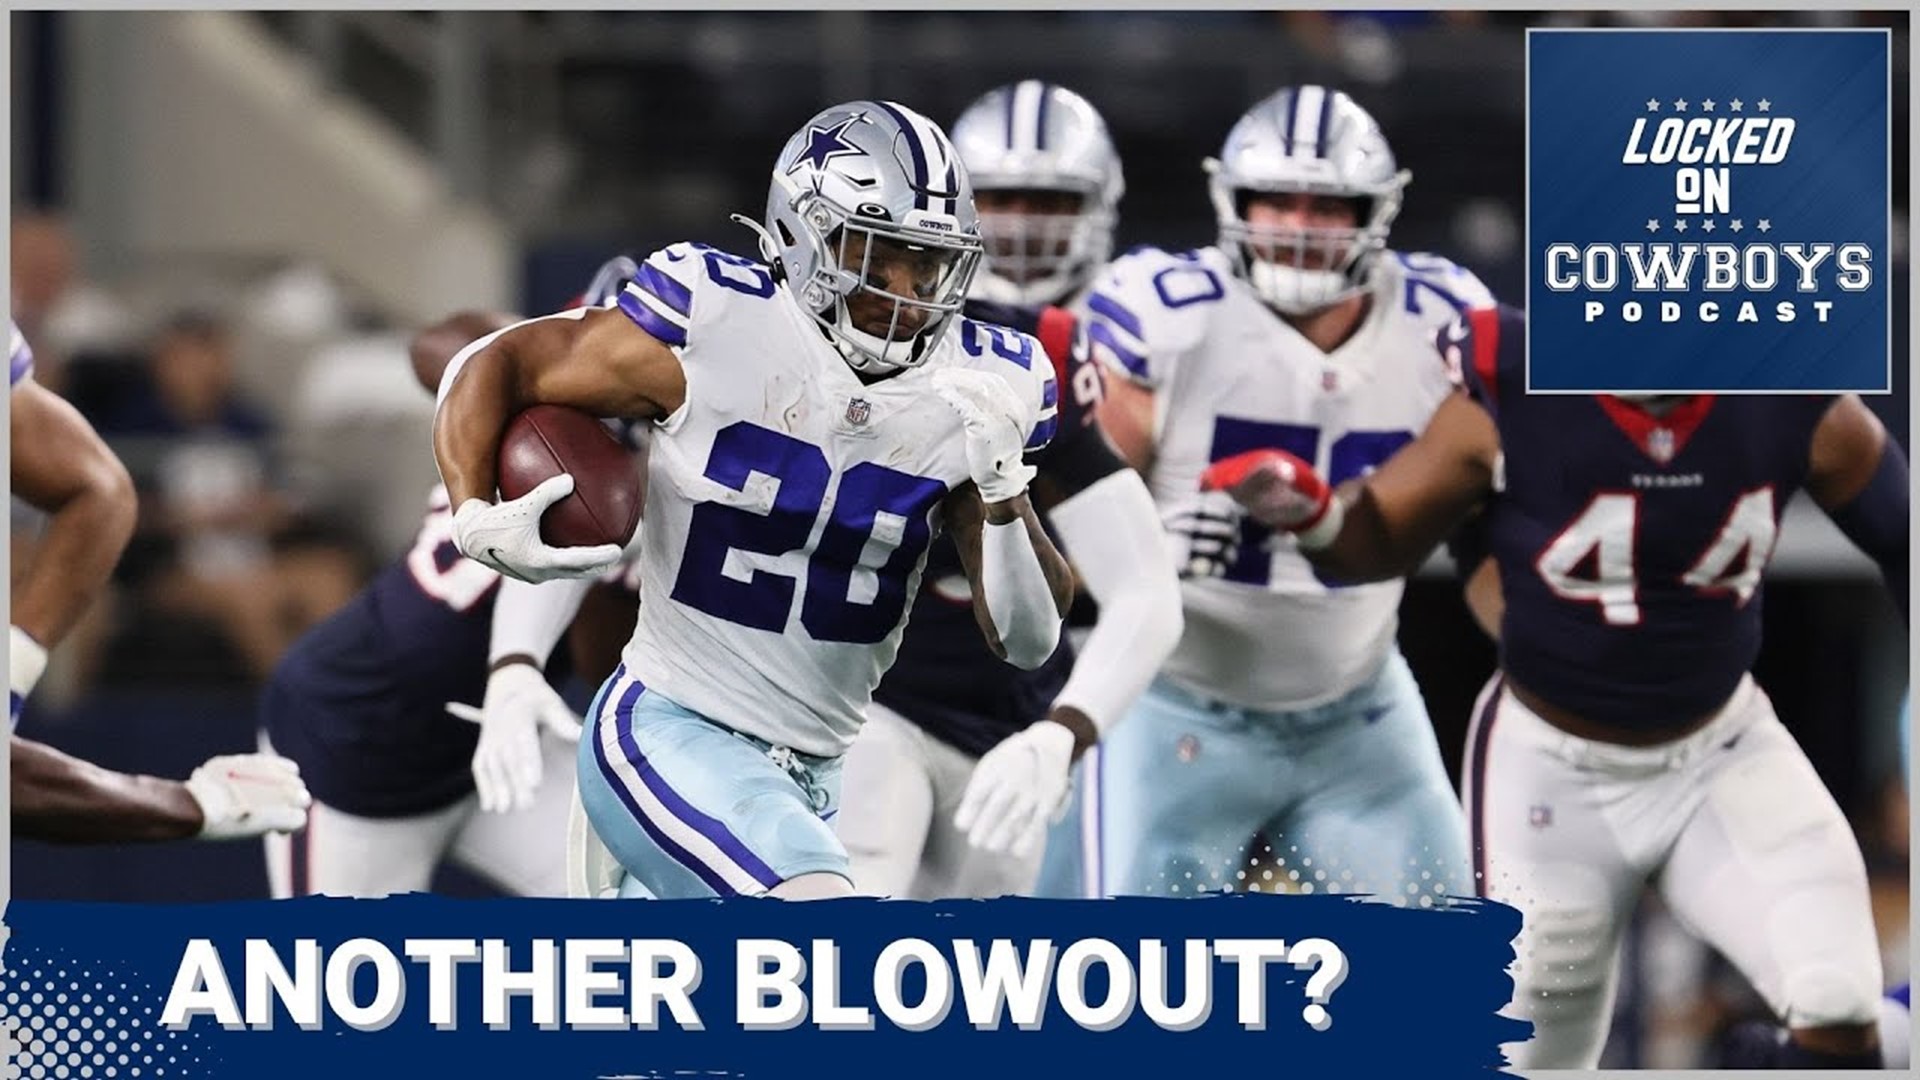 Marcus Mosher and Landon McCool preview the Week 14 game between the Houston Texans and the Dallas Cowboys and debate if it's another blowout opportunity for Dallas